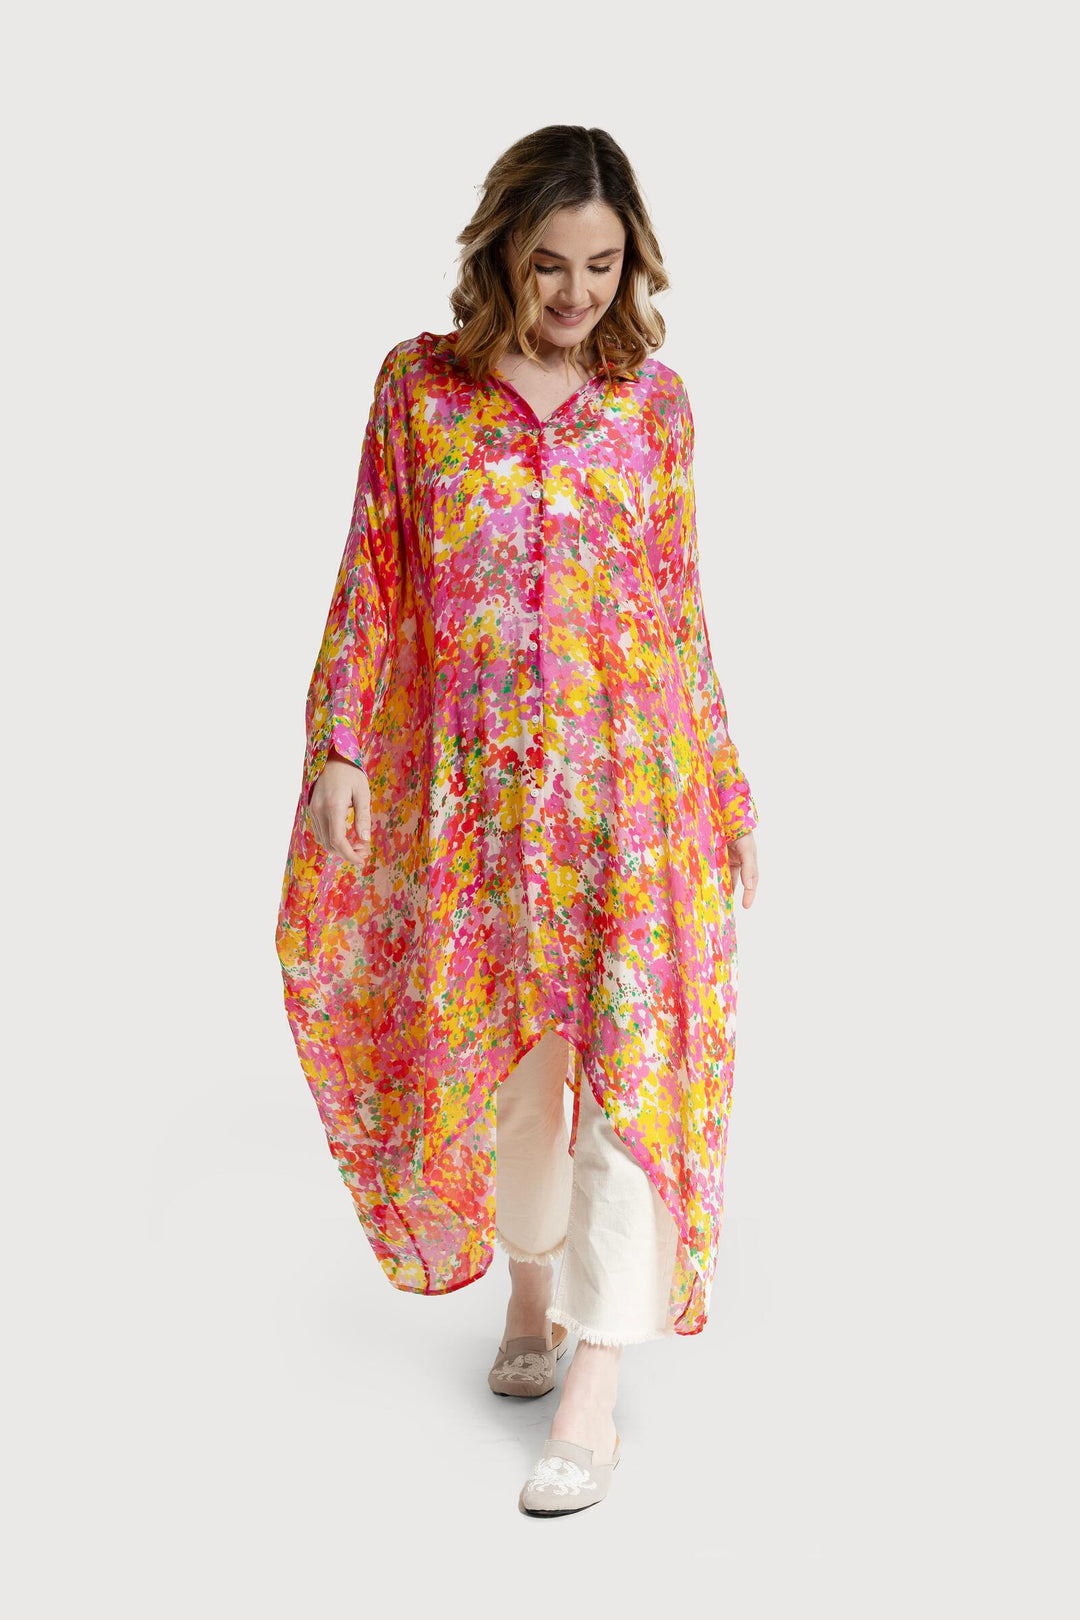 Oversized Colorful Floral Shirt Hot Pink